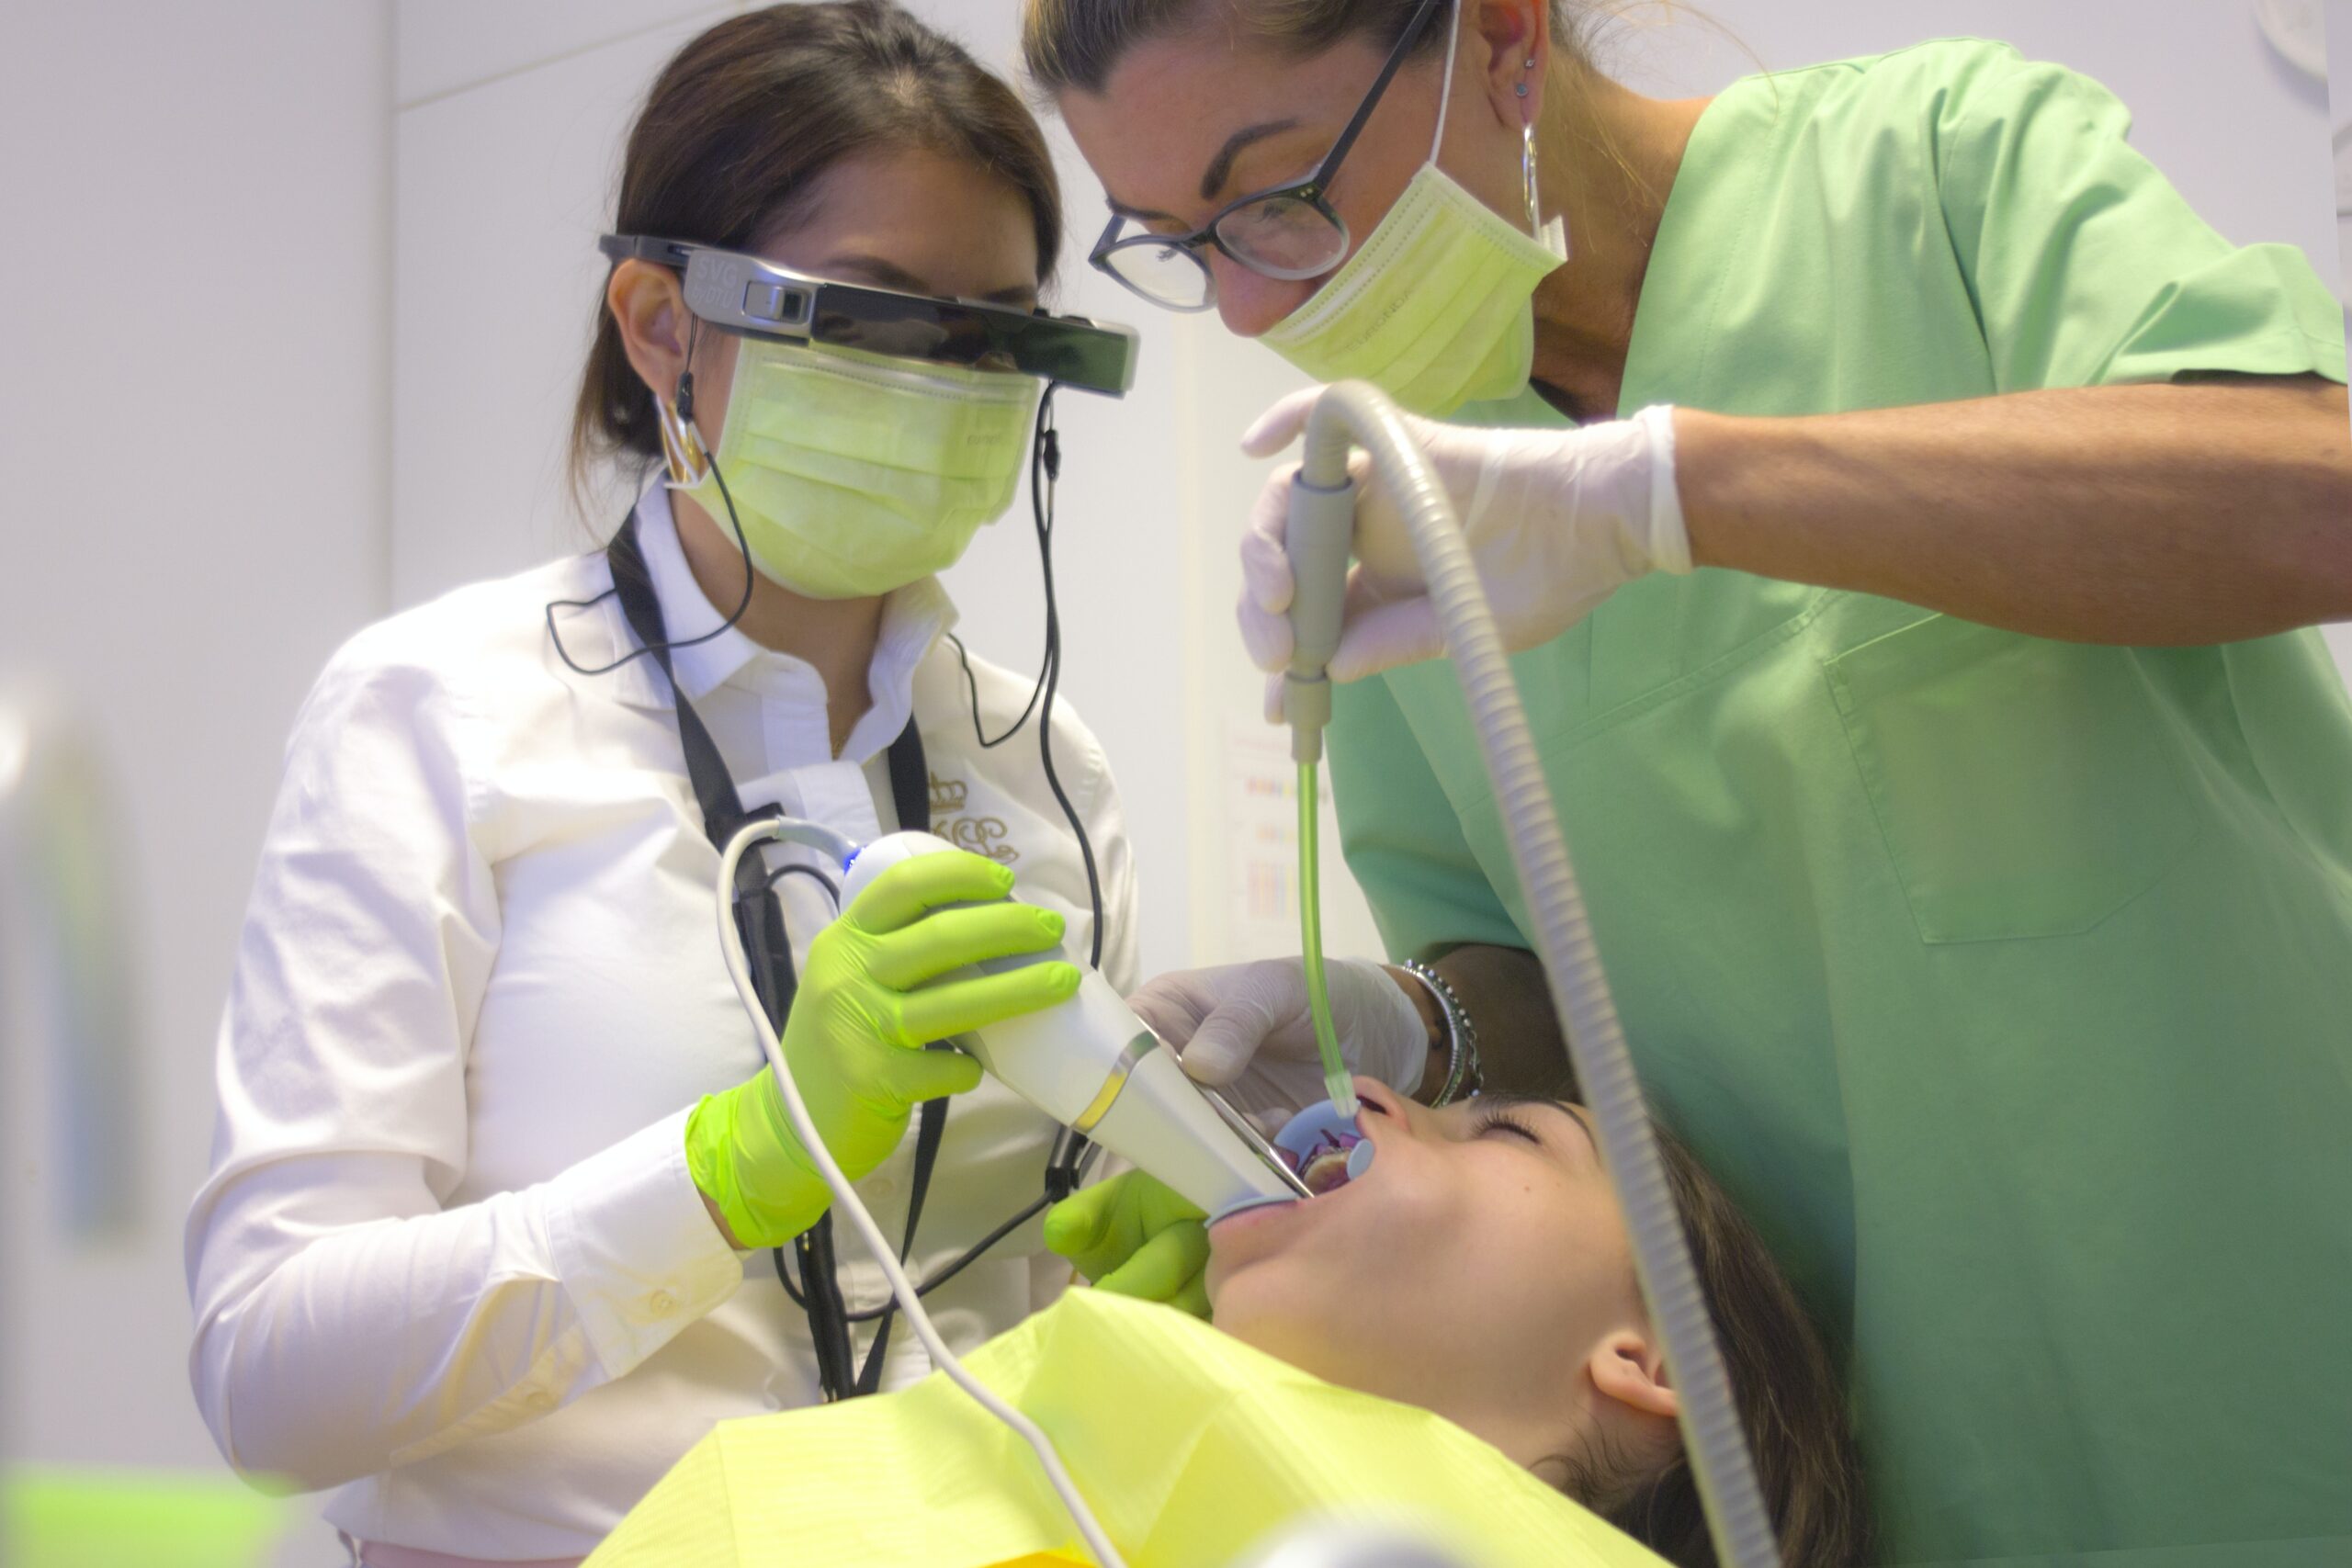 Top 3 Job Challenges Of The Dental Assisting Career